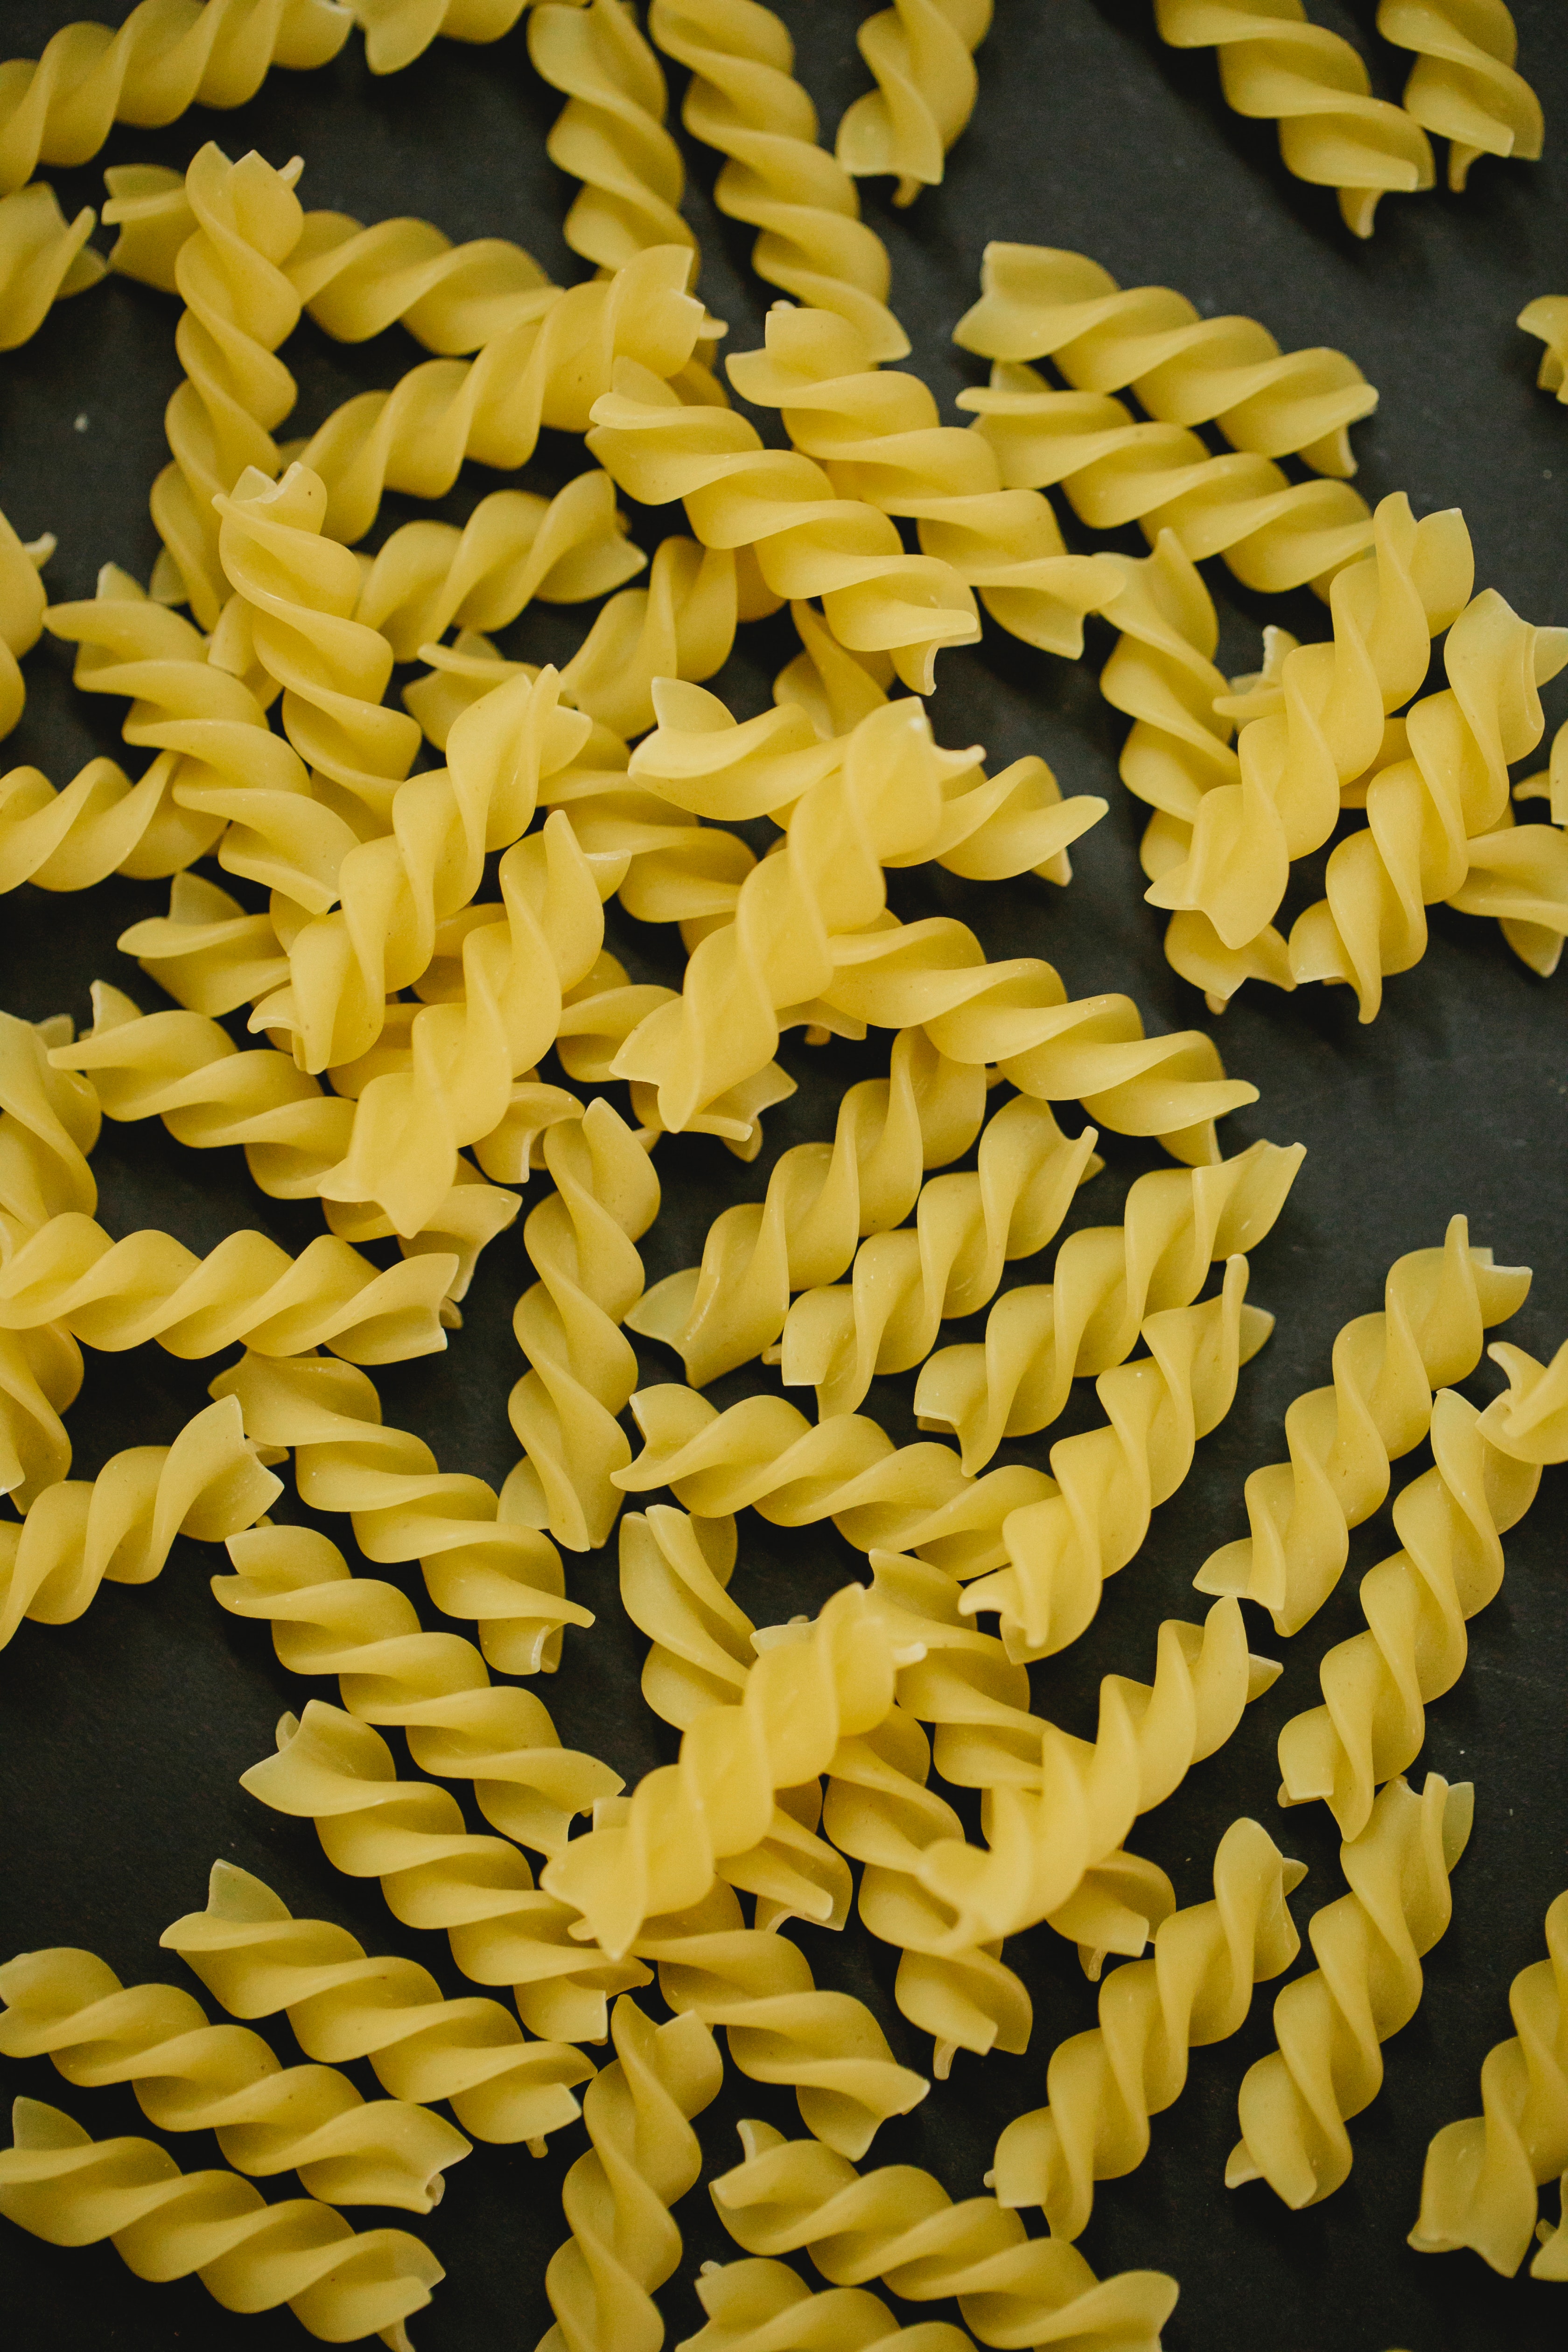 27 Types of Pasta and Their Uses